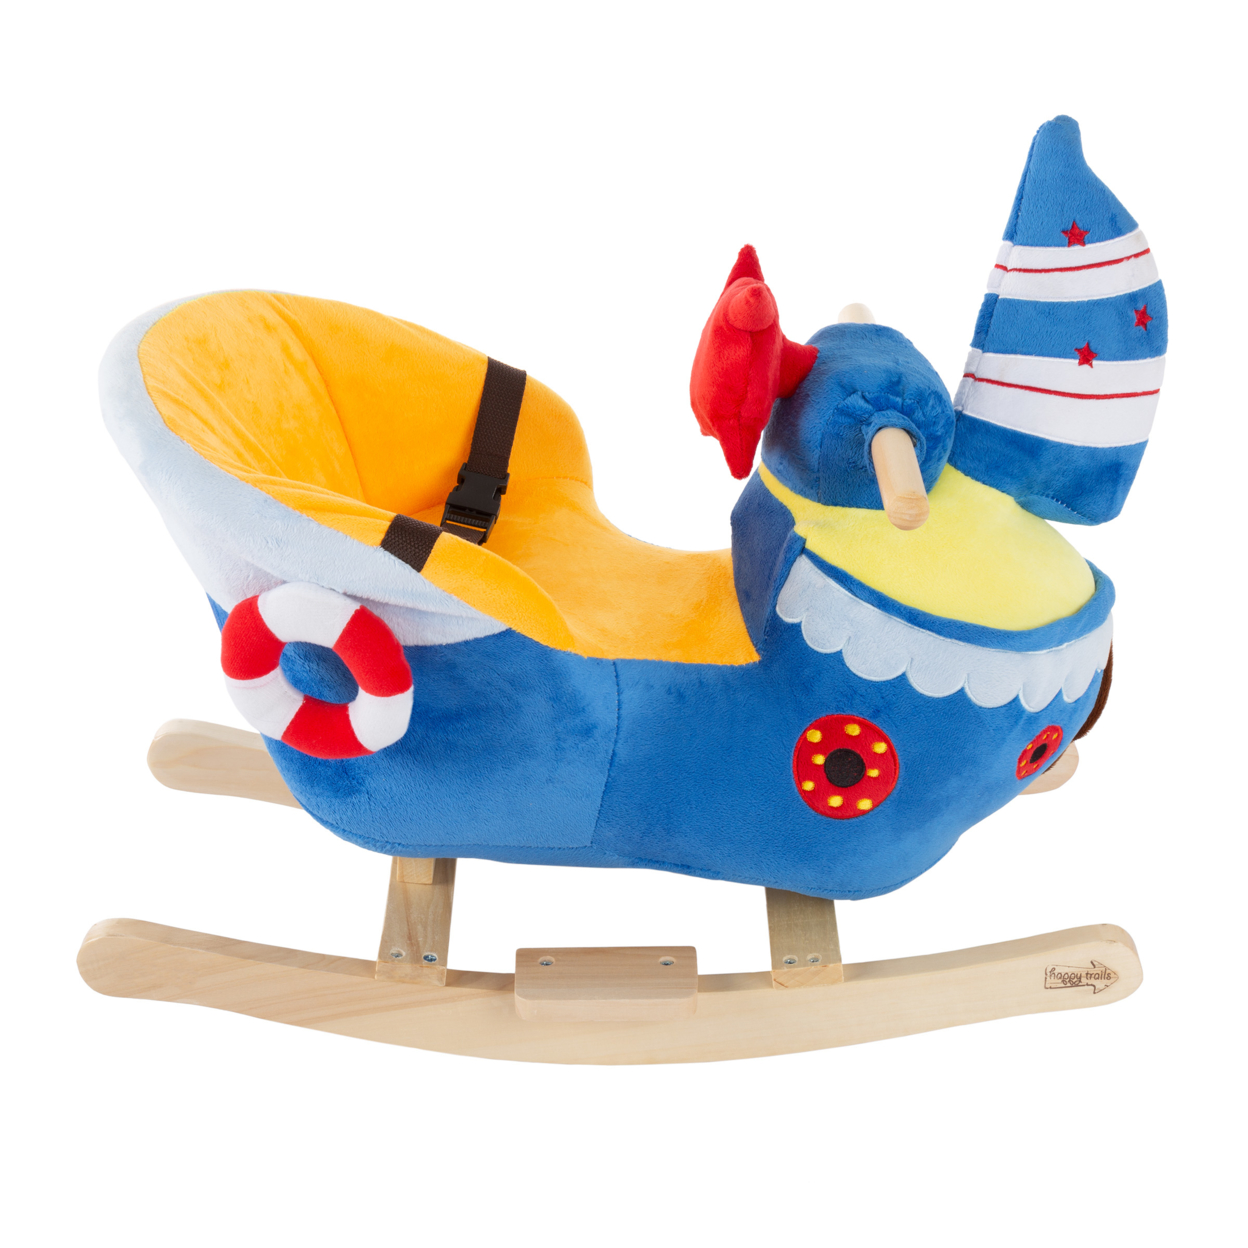 Boat Rocker Toy-Kids Ride On Soft Fabric Covered Wooden Rocking Ship-Neutral Design For Any Nursery